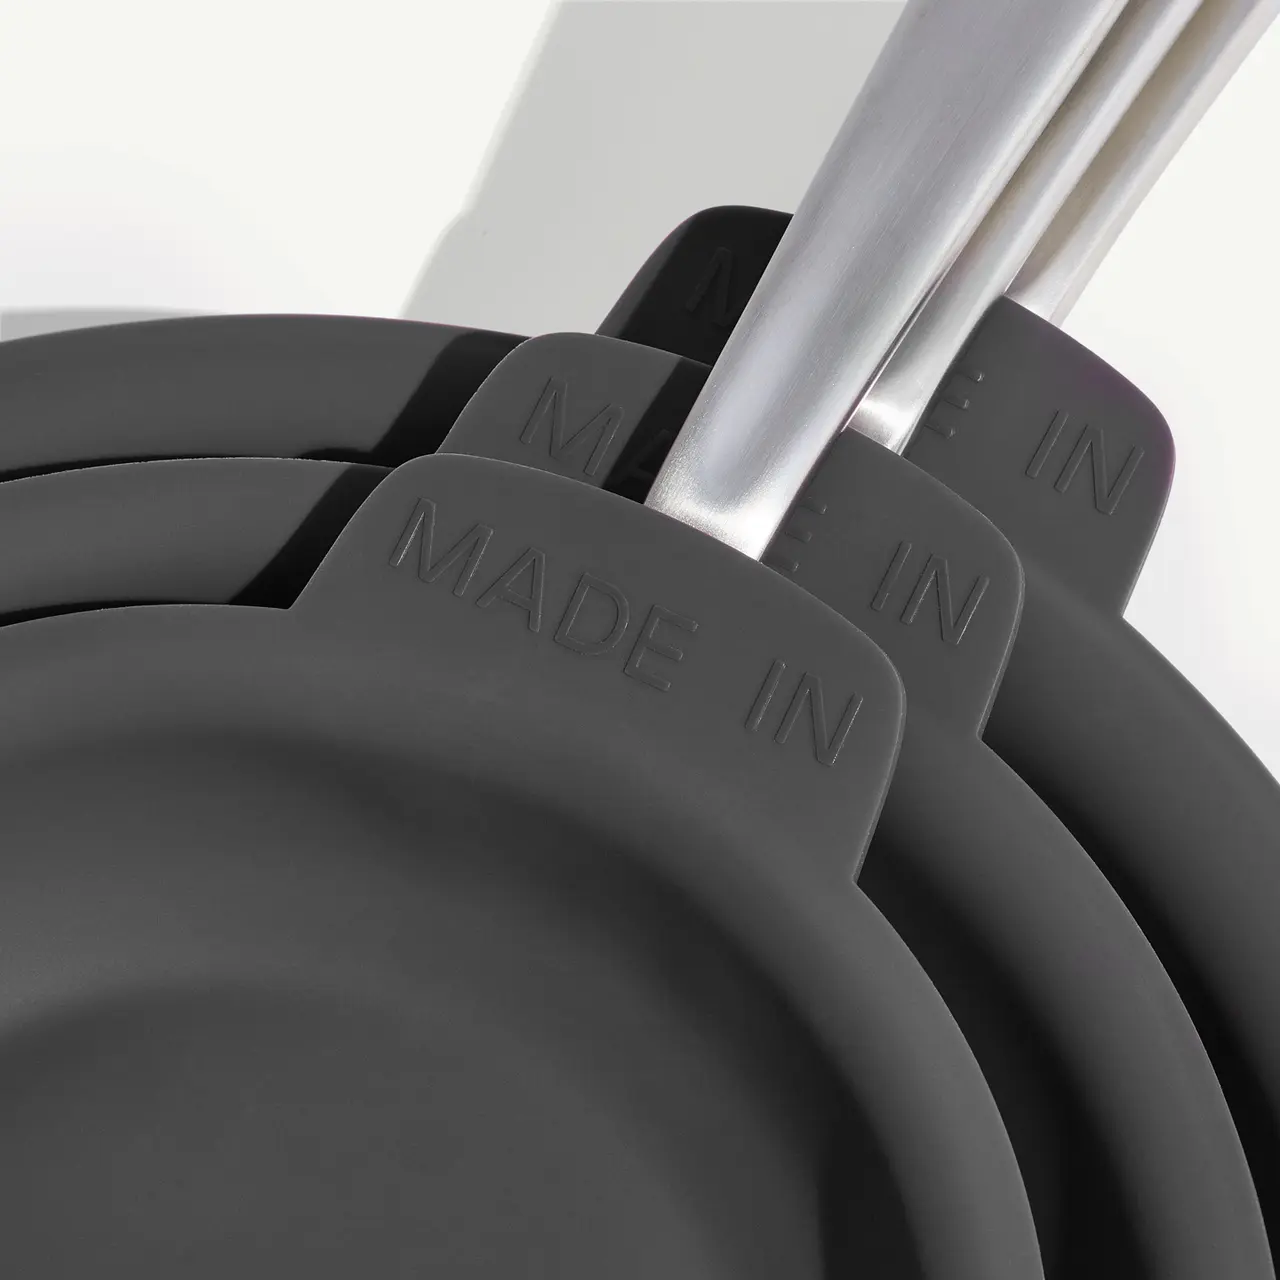 A close-up of a stack of dark non-stick pans with "MADE IN" imprinted on their handles, suggesting a focus on the manufacturing origin.